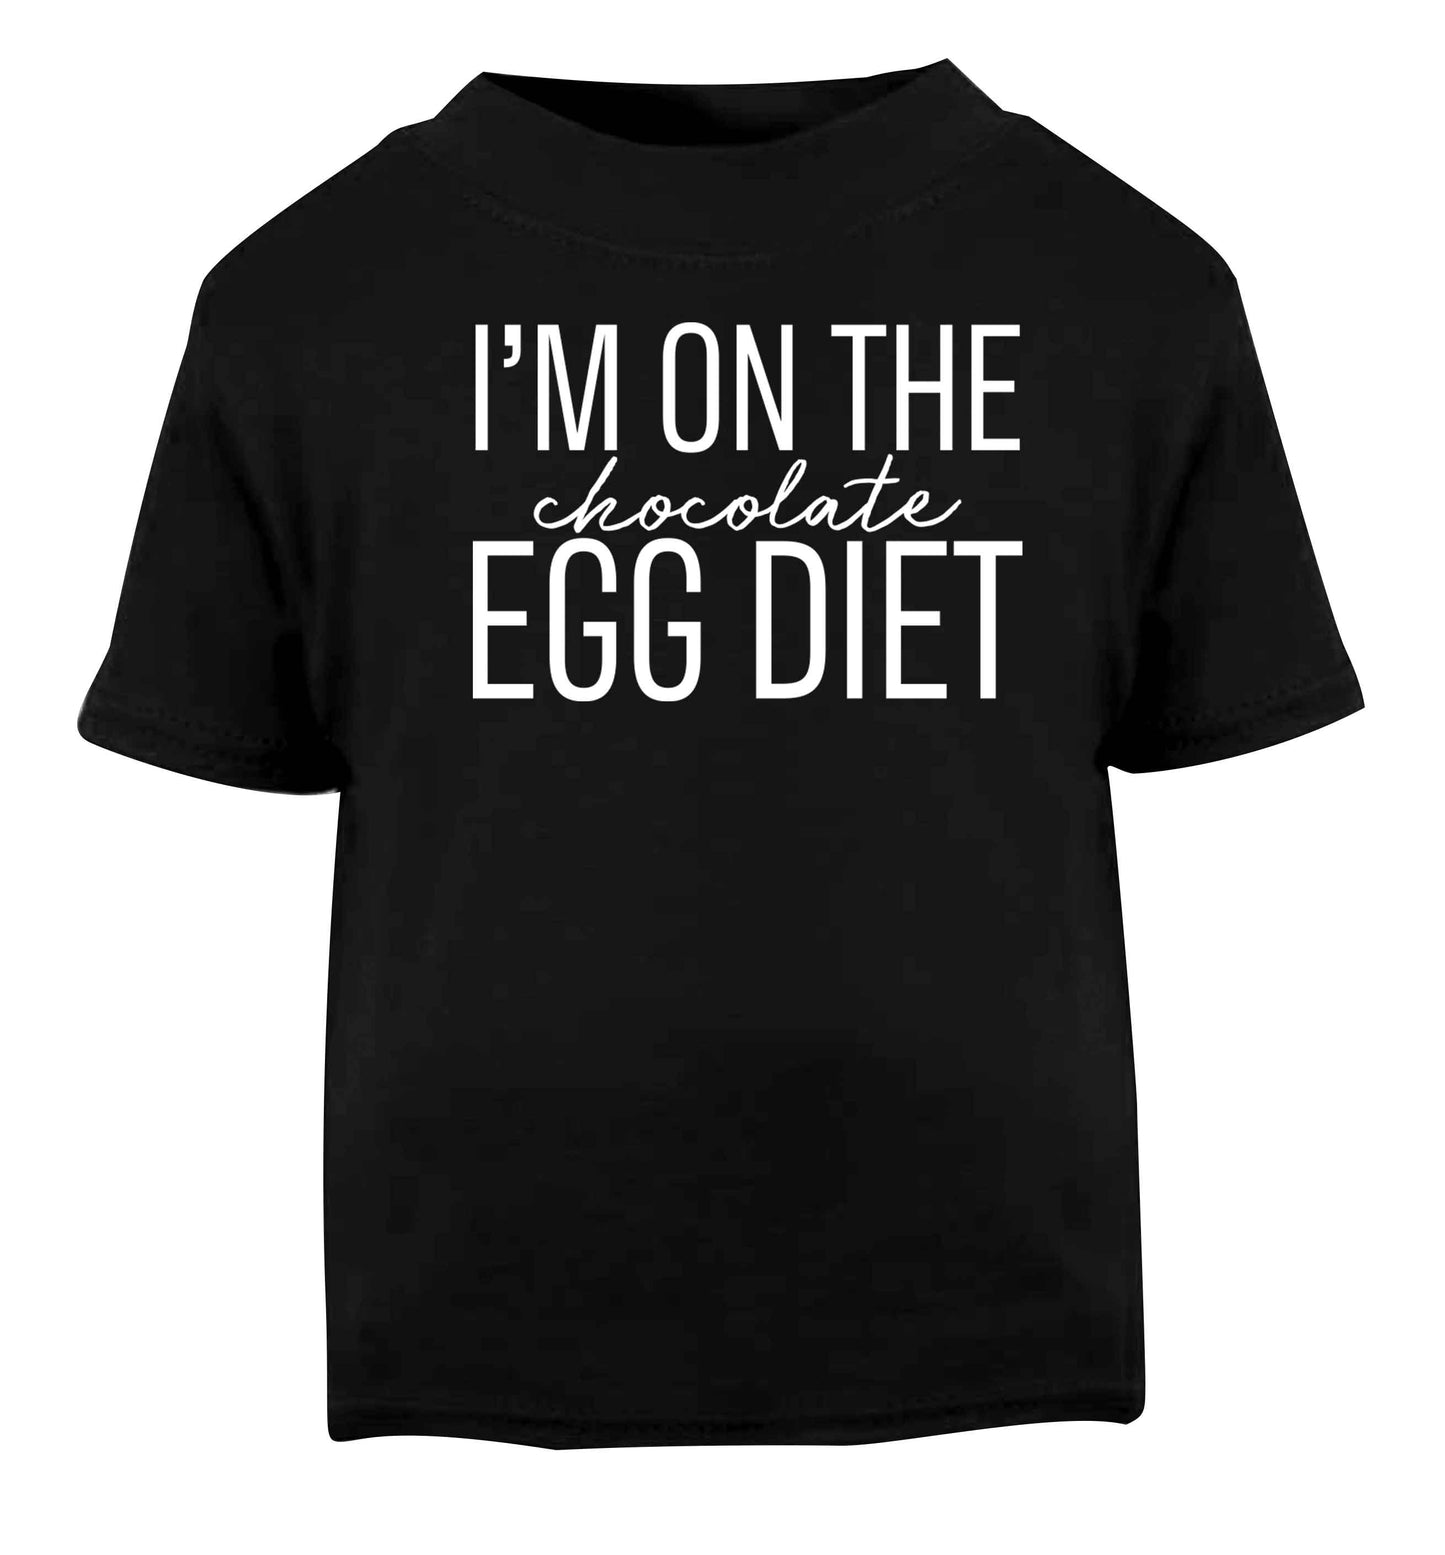 I'm on the chocolate egg diet Black baby toddler Tshirt 2 years